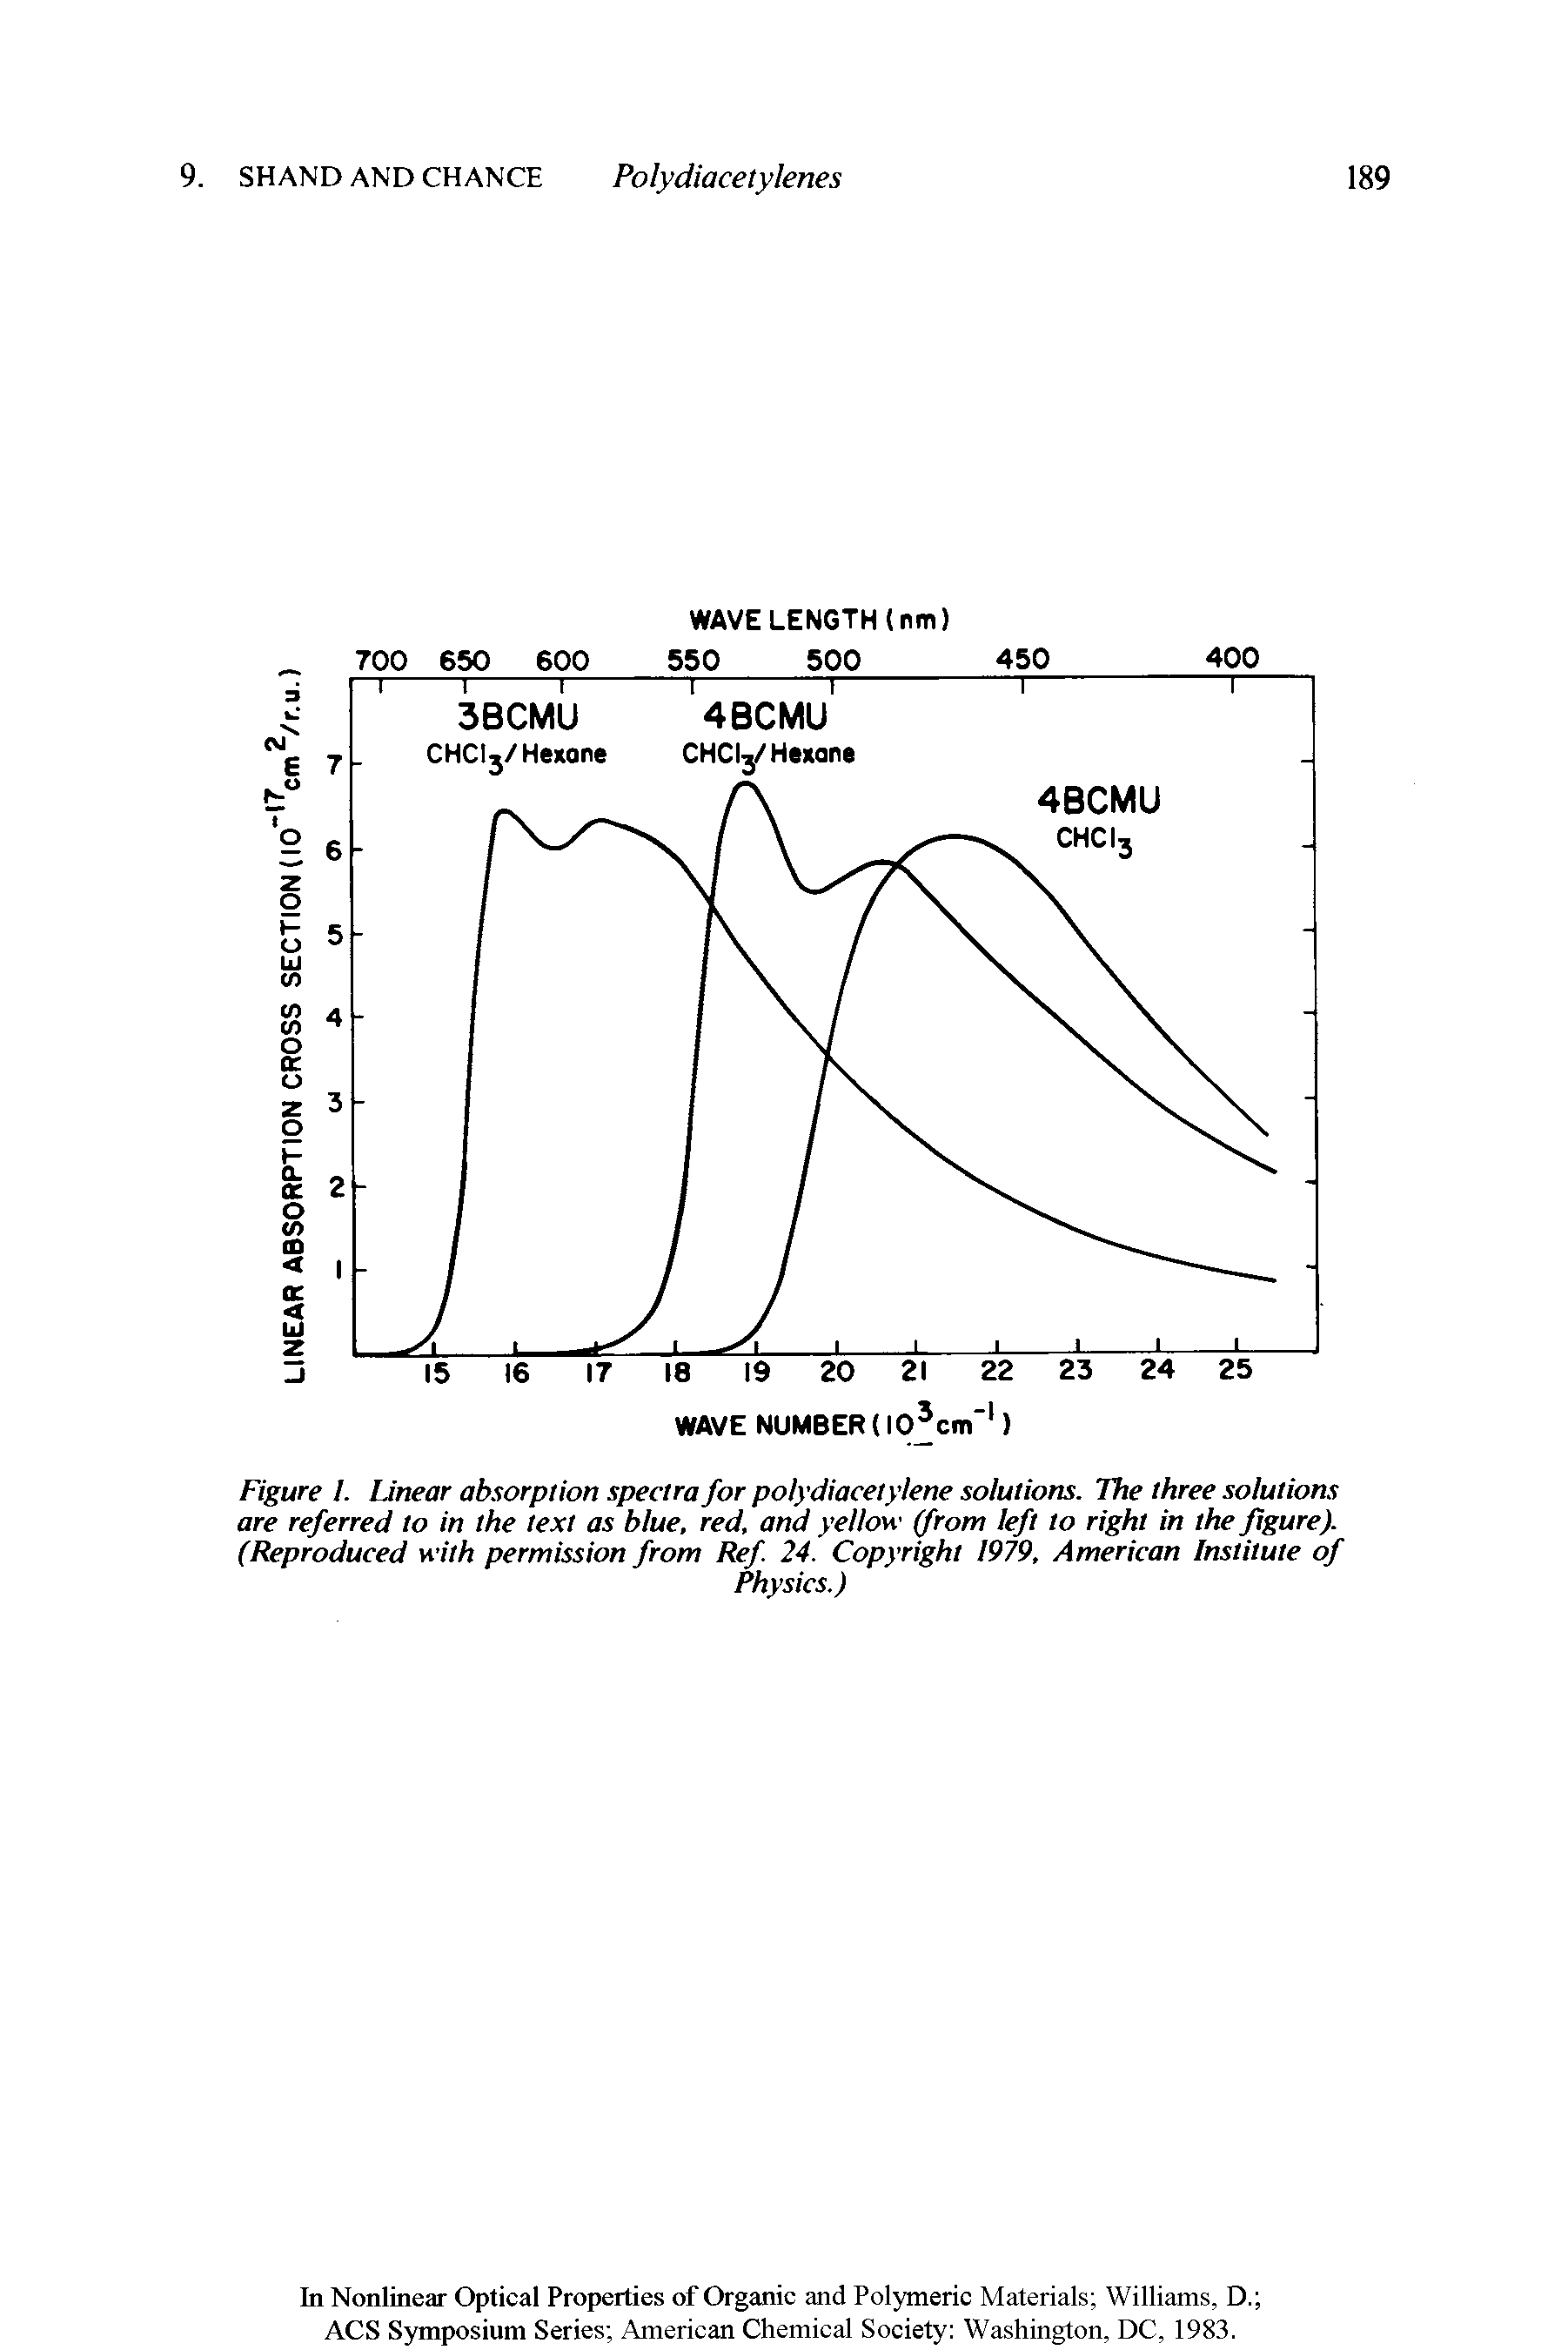 Figure I. Unear absorption spectra for polydiacetylene solutions. The three solutions are referred to in the text as blue, red, and yellow (from left to right in the figure). (Reproduced with permission from Ref. 24. Copyright 1979, American Institute of...